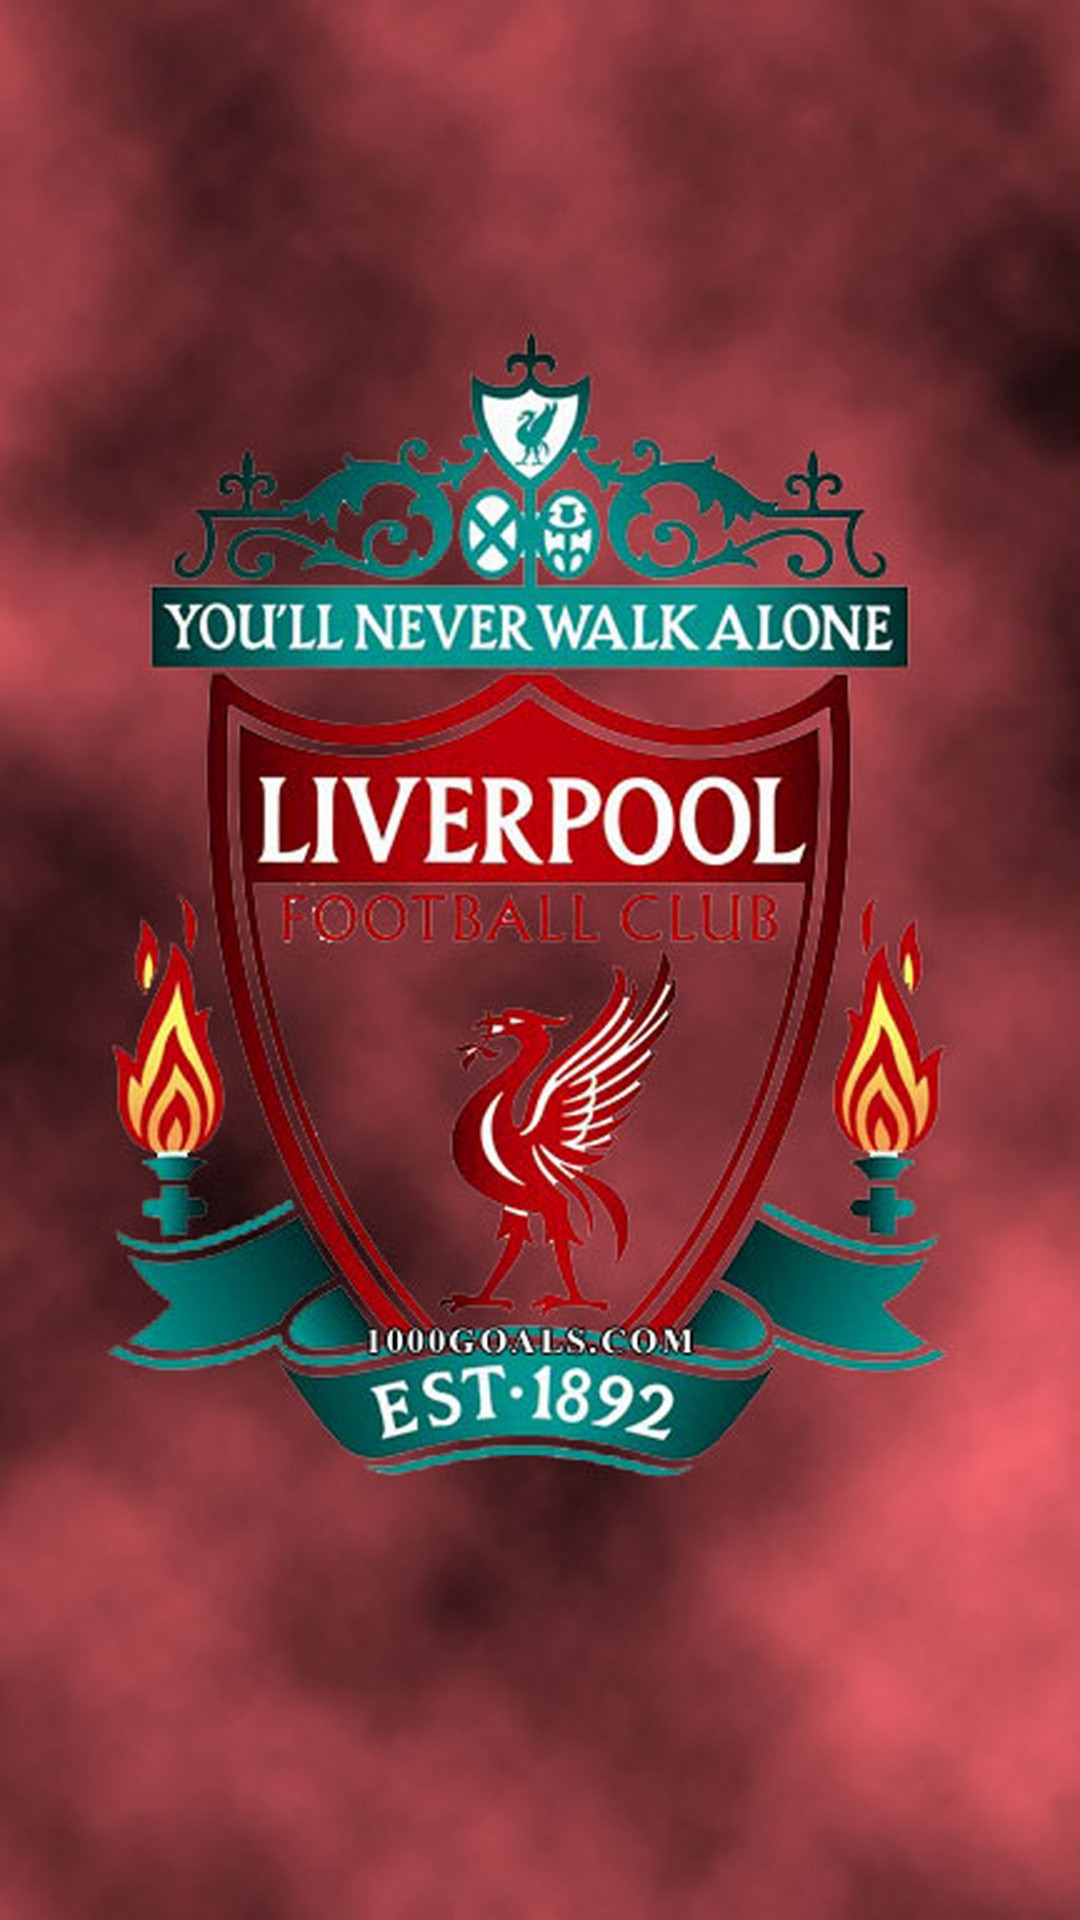 Android Wallpaper Liverpool With high-resolution 1080X1920 pixel. You can use this wallpaper for your Android backgrounds, Tablet, Samsung Screensavers, Mobile Phone Lock Screen and another Smartphones device